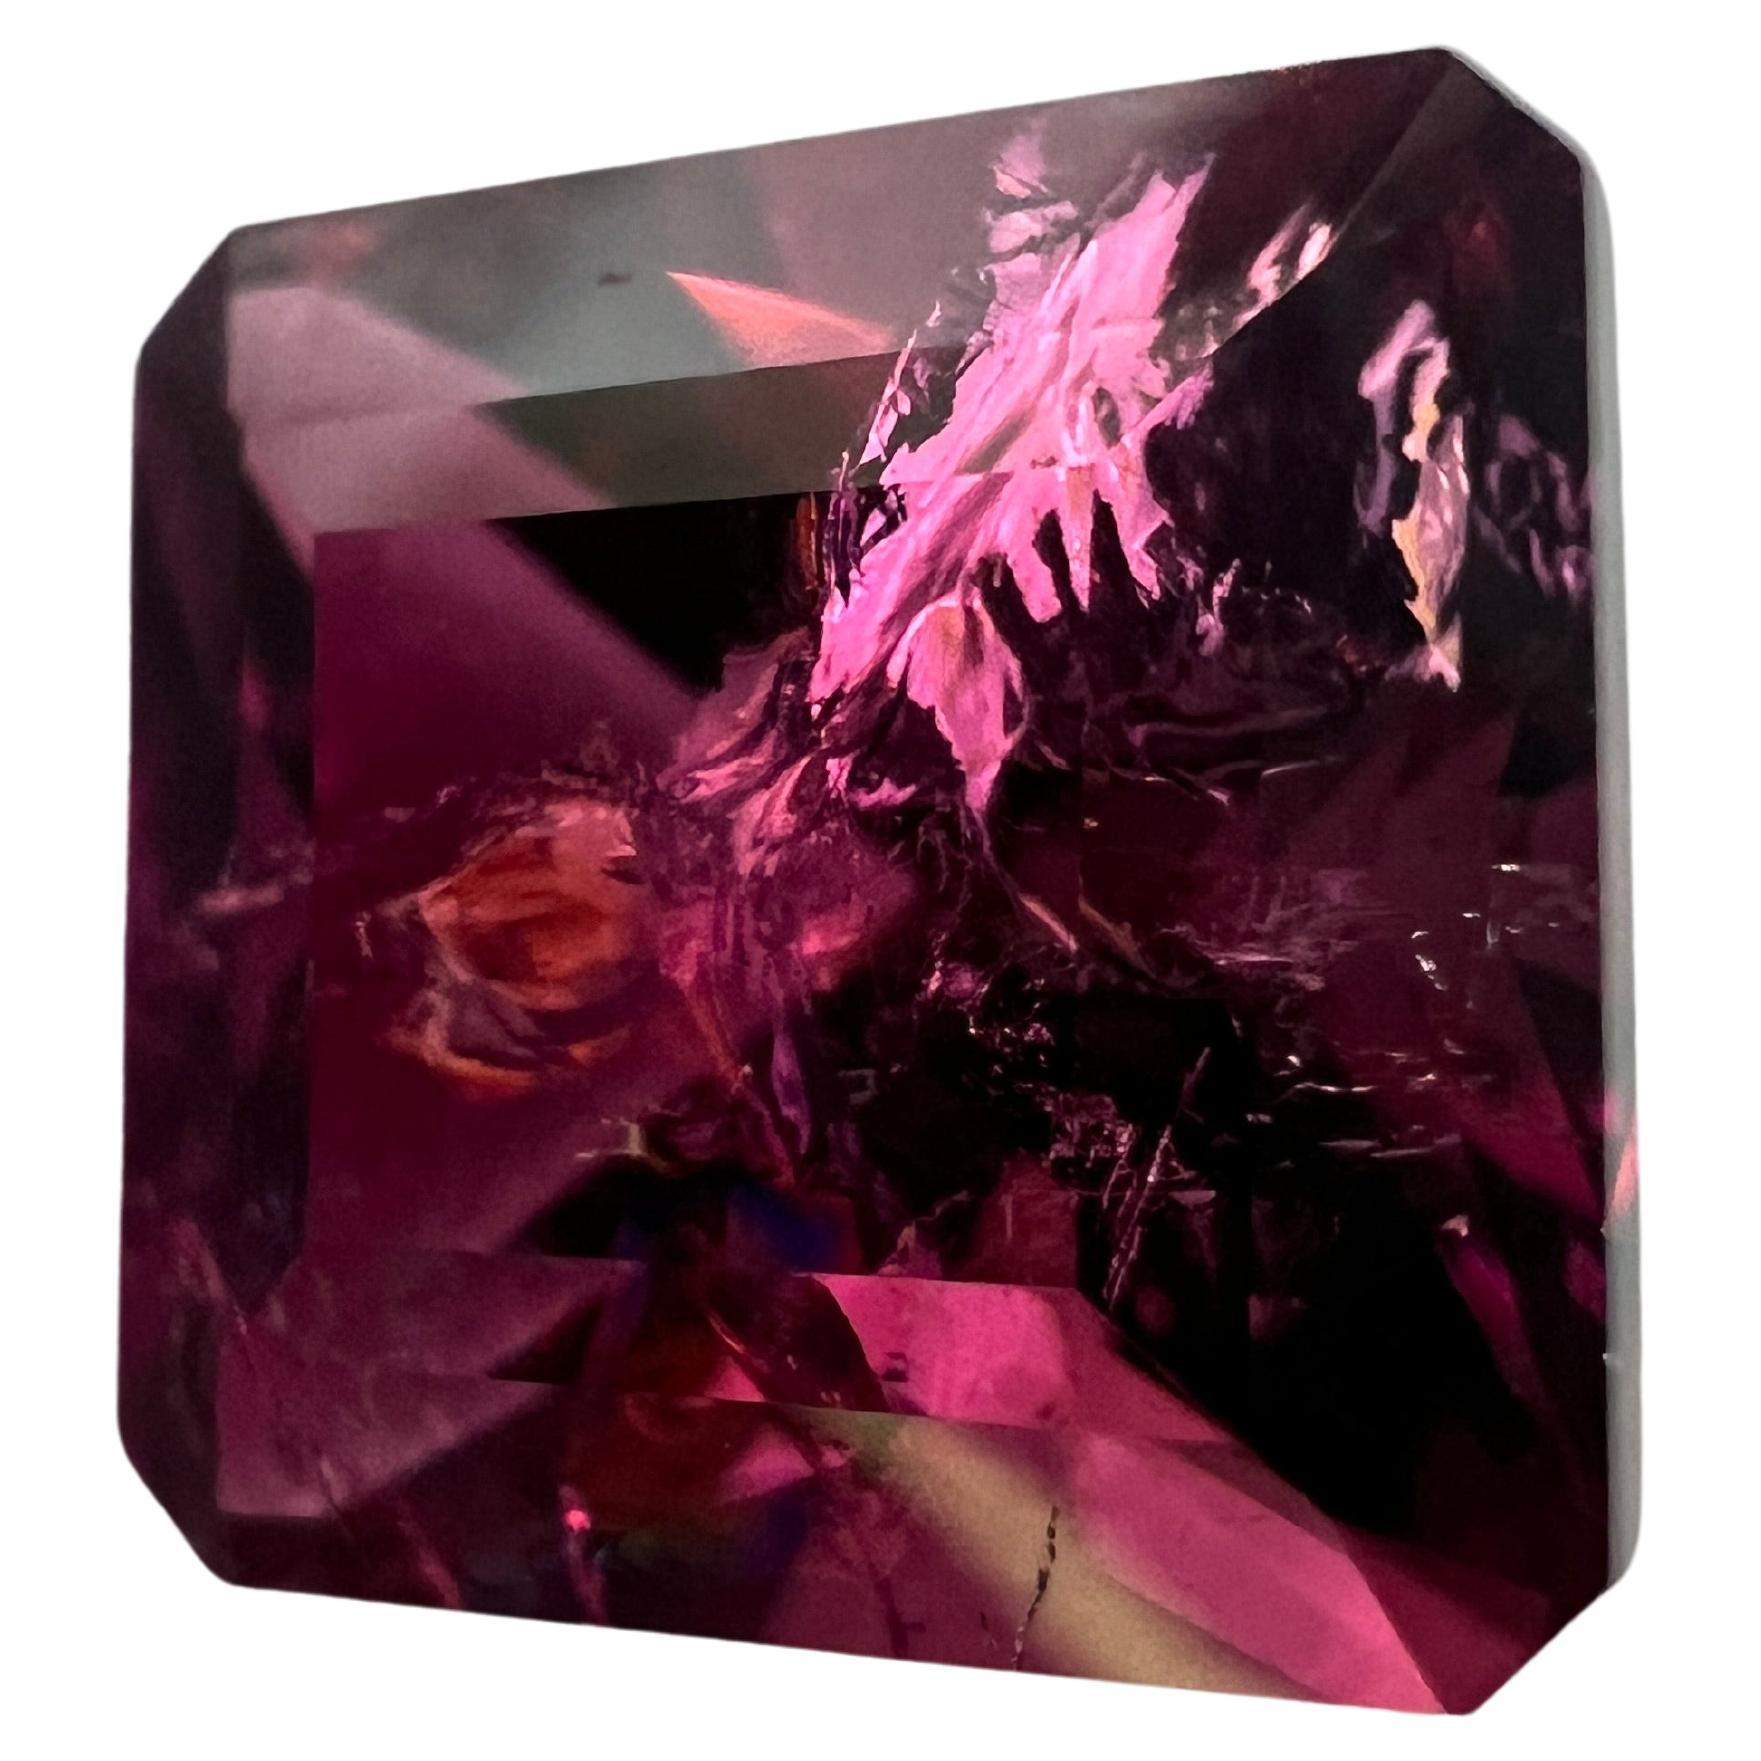 Our 5.2ct Pink Asscher Rubellite is a treasure of unparalleled beauty. Expertly cut in the prestigious Asscher style, this gemstone boasts step-cut facets that draw the eye inward, enhancing the stone’s natural brilliance and rich pink hue.

Key